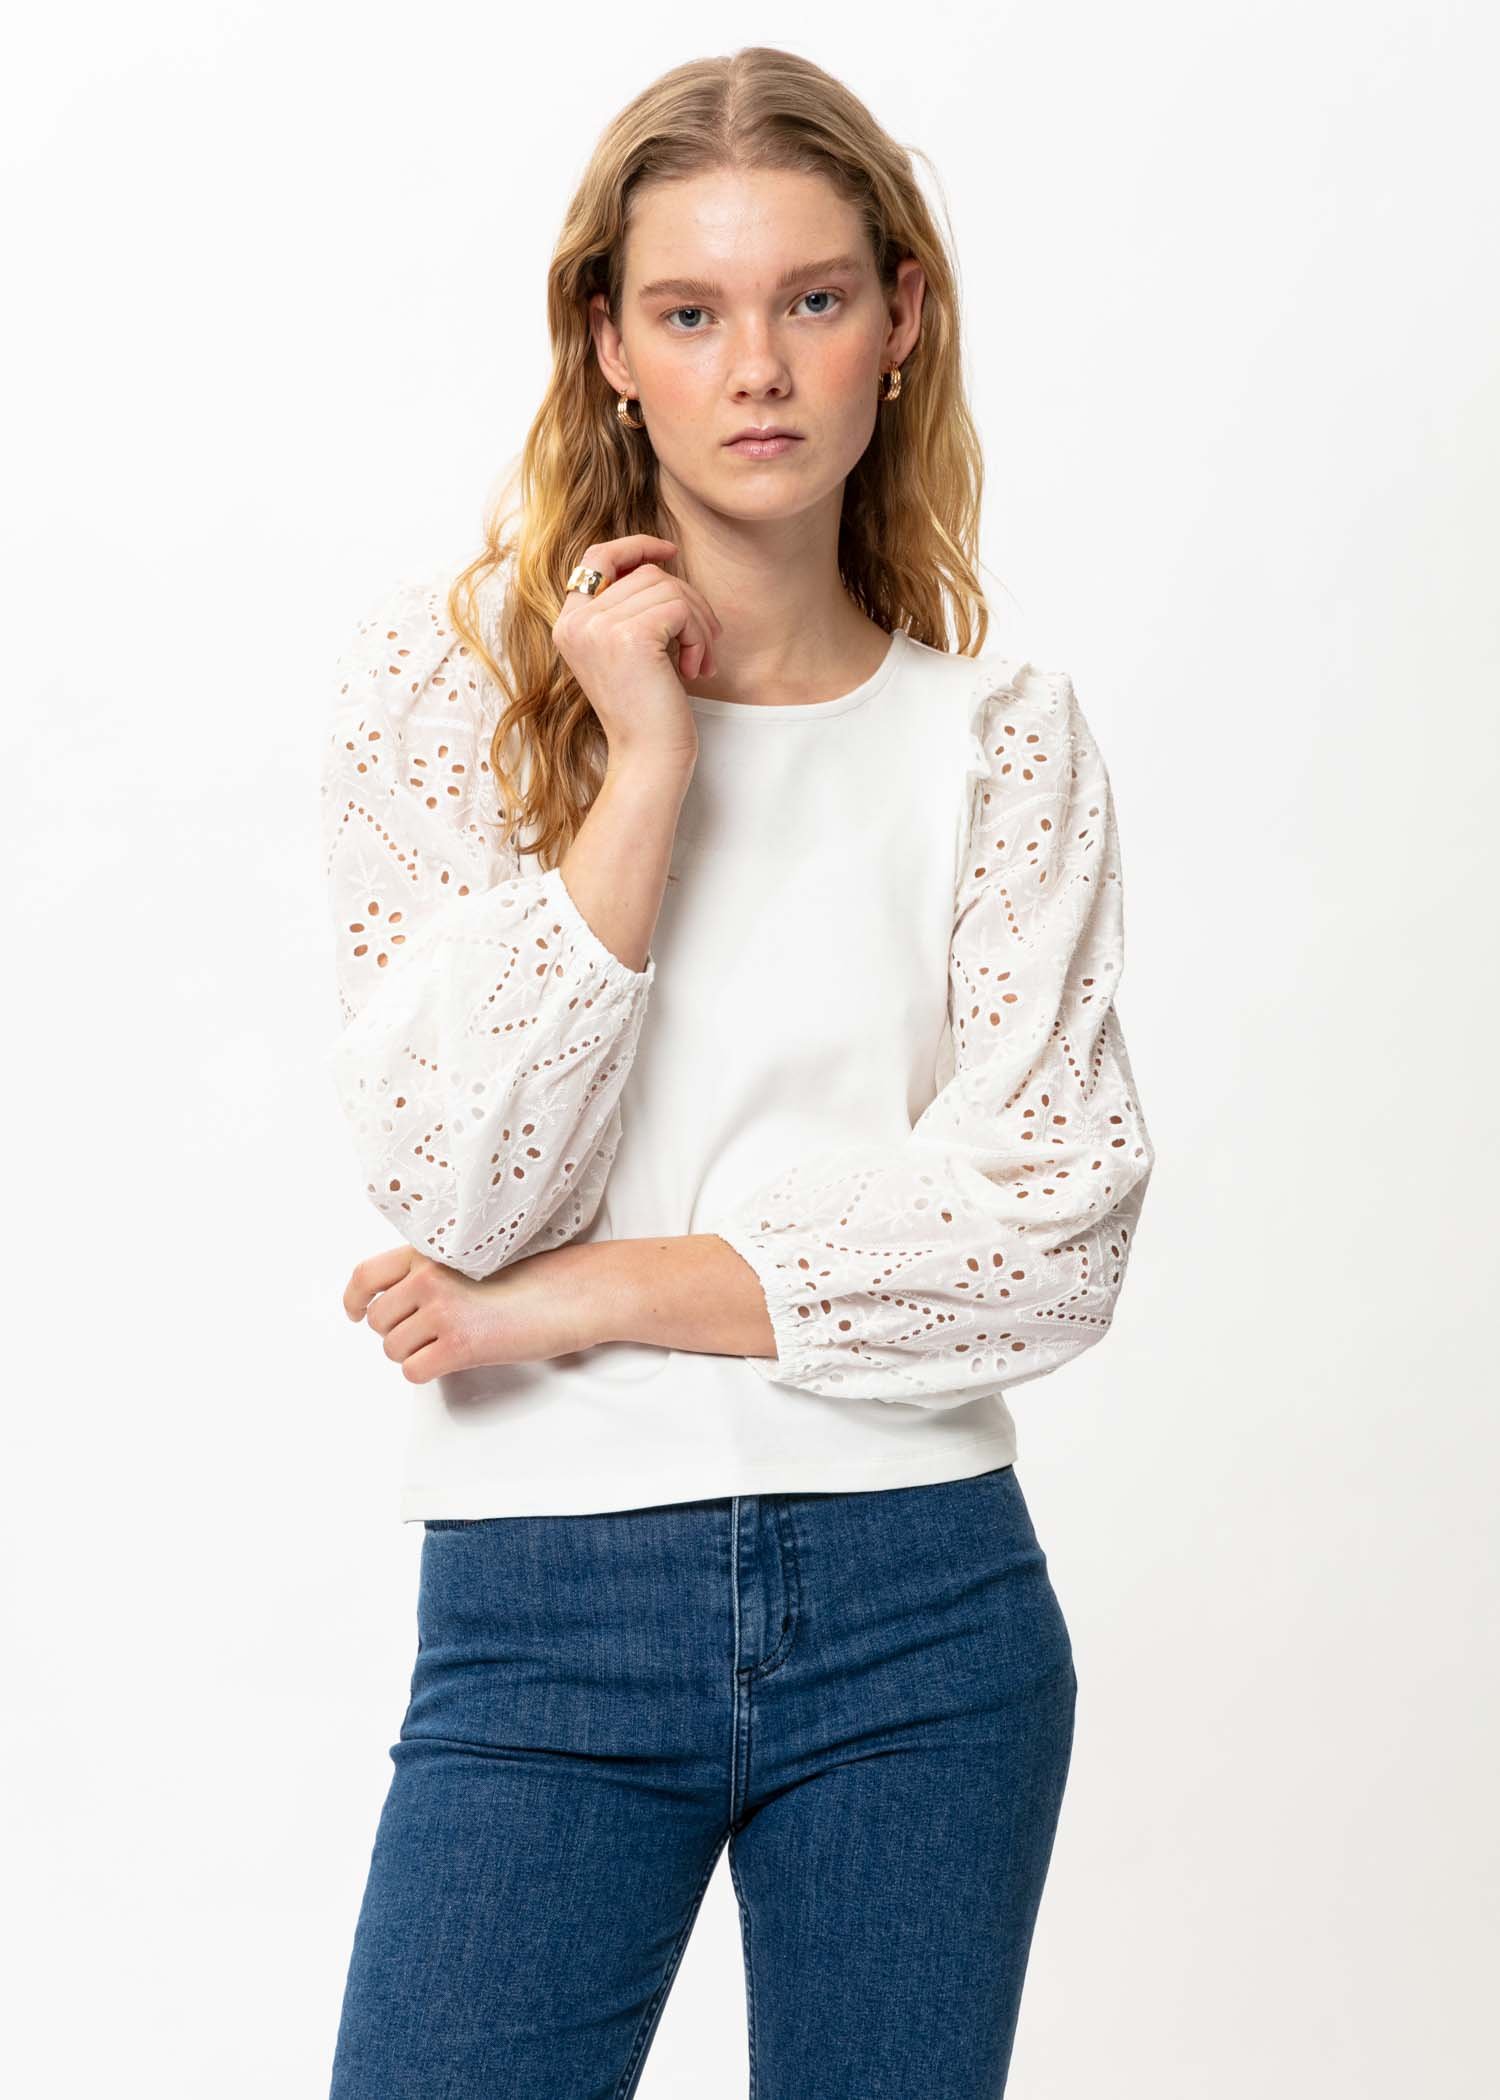 Broderie anglaise top